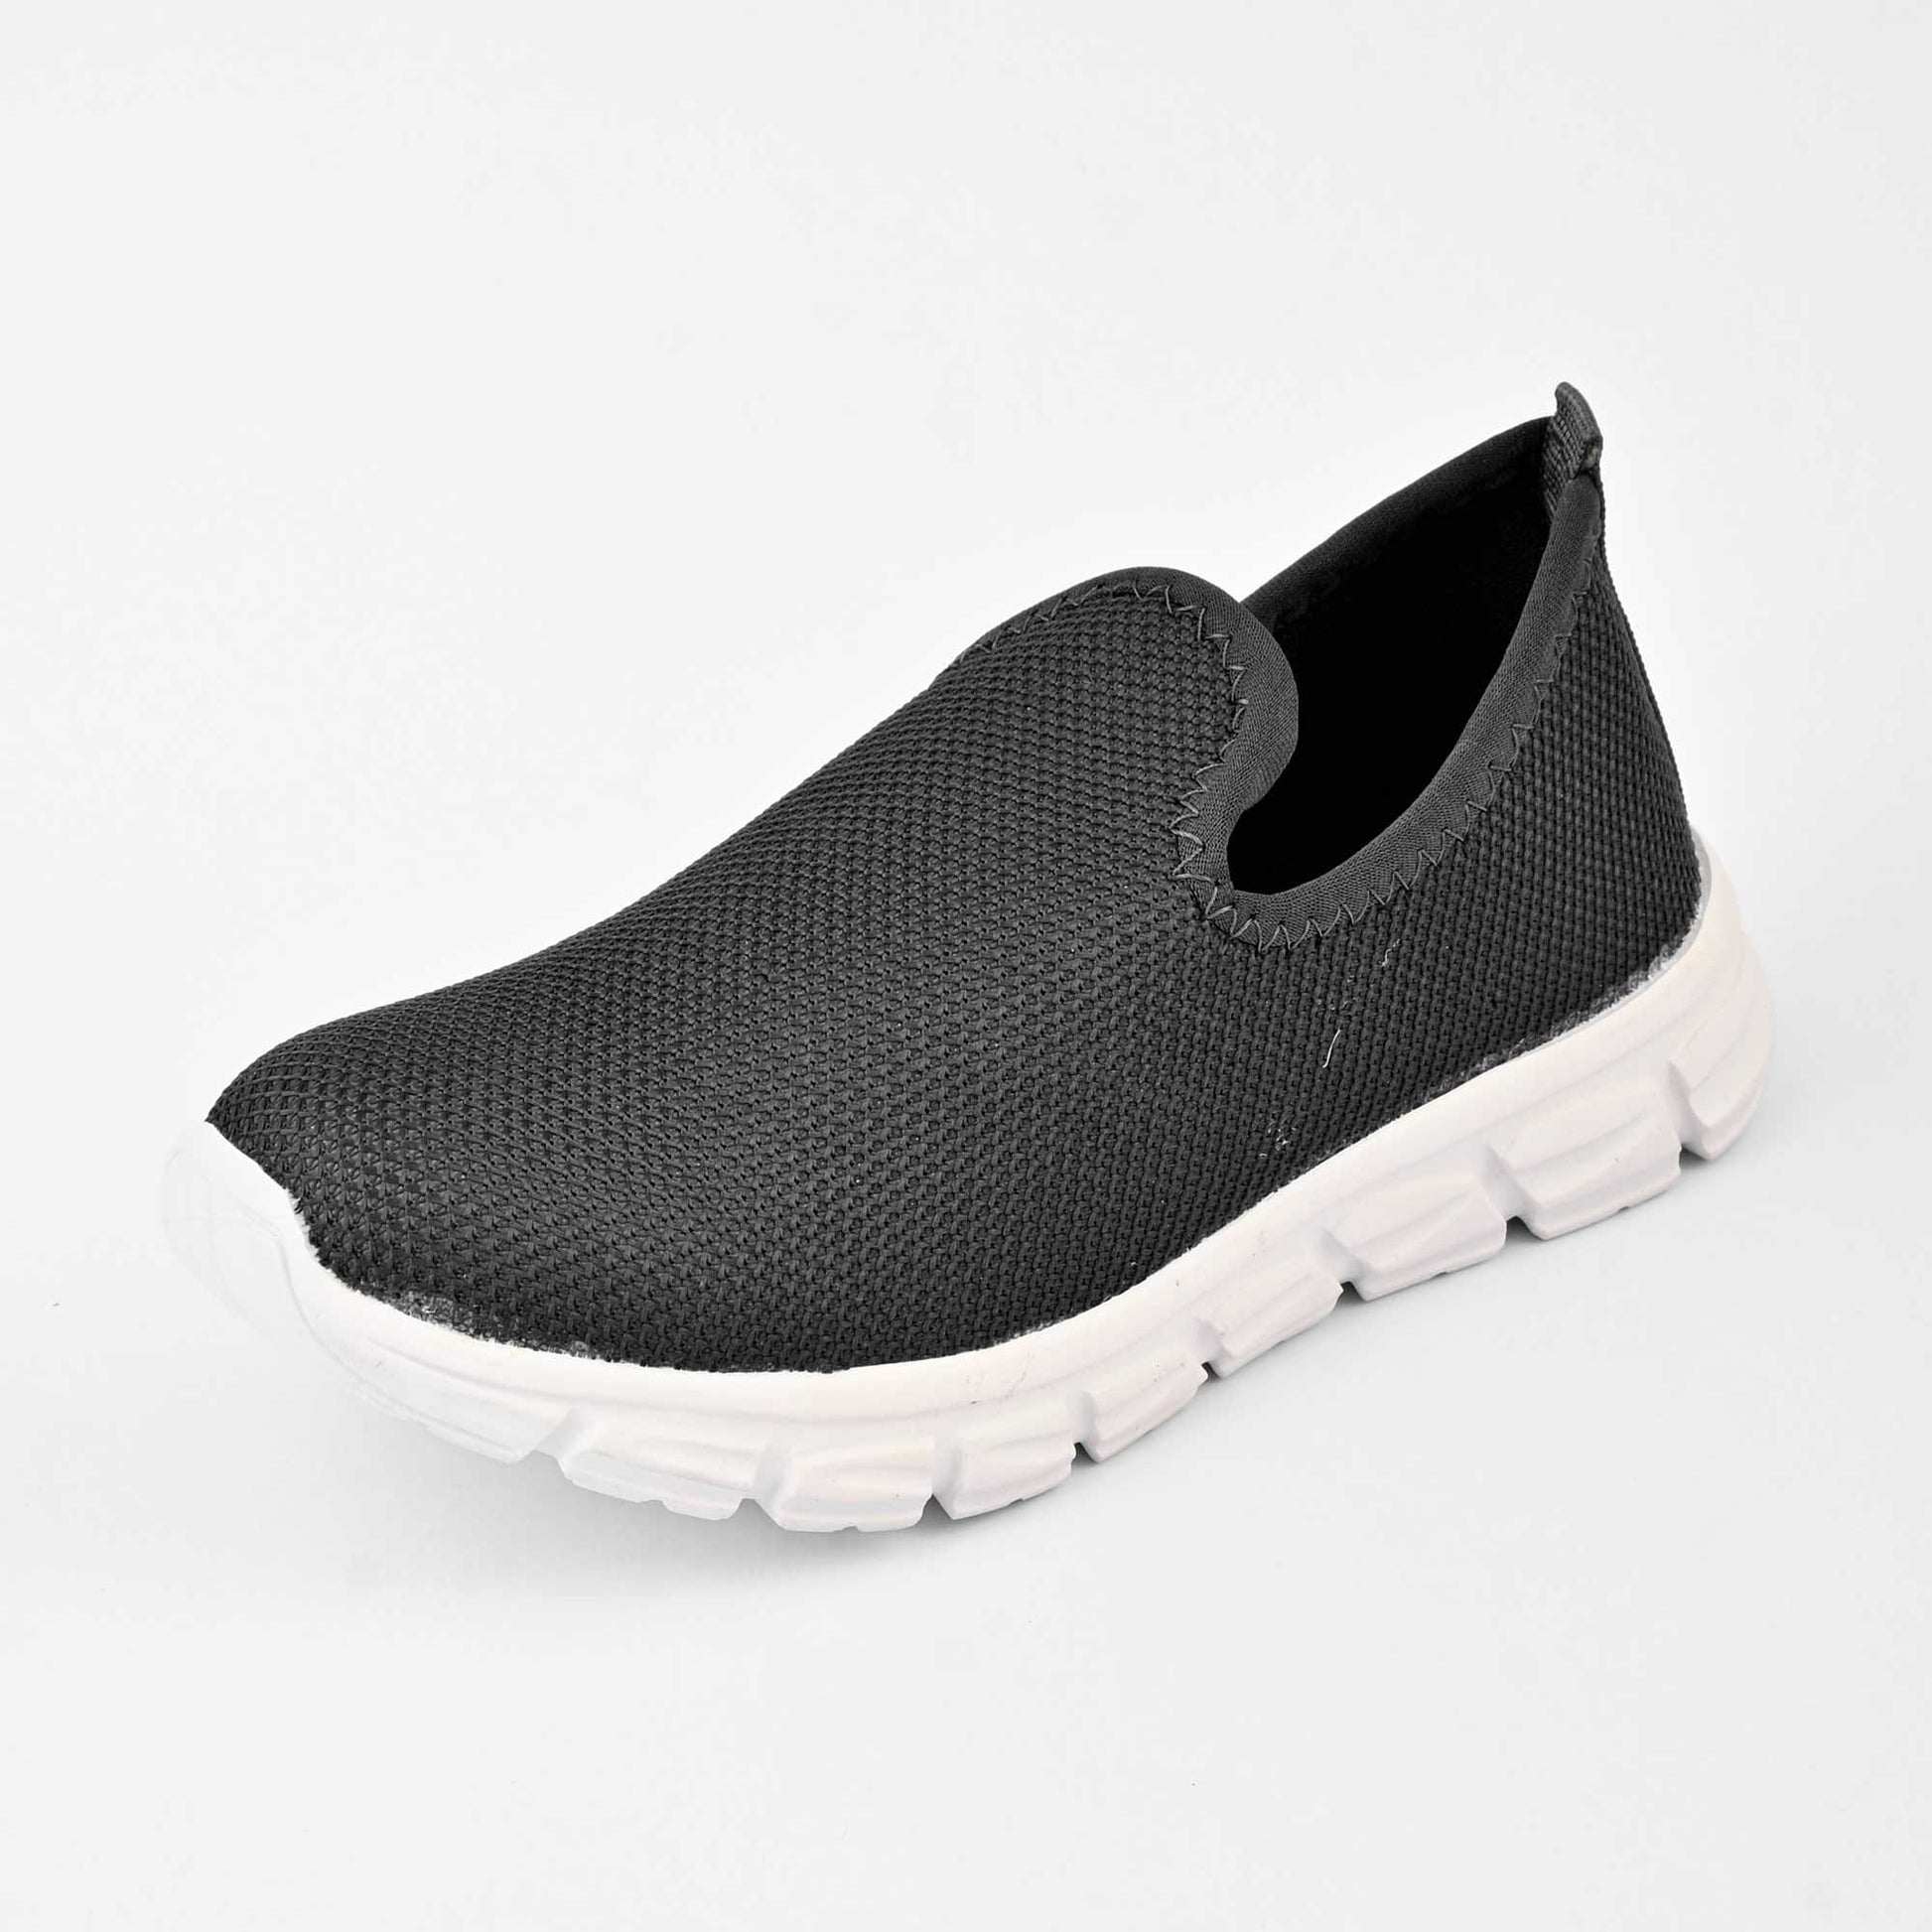 Tampa Performance Jogger Shoes Unisex Shoes SNAN Traders Black EUR 39 